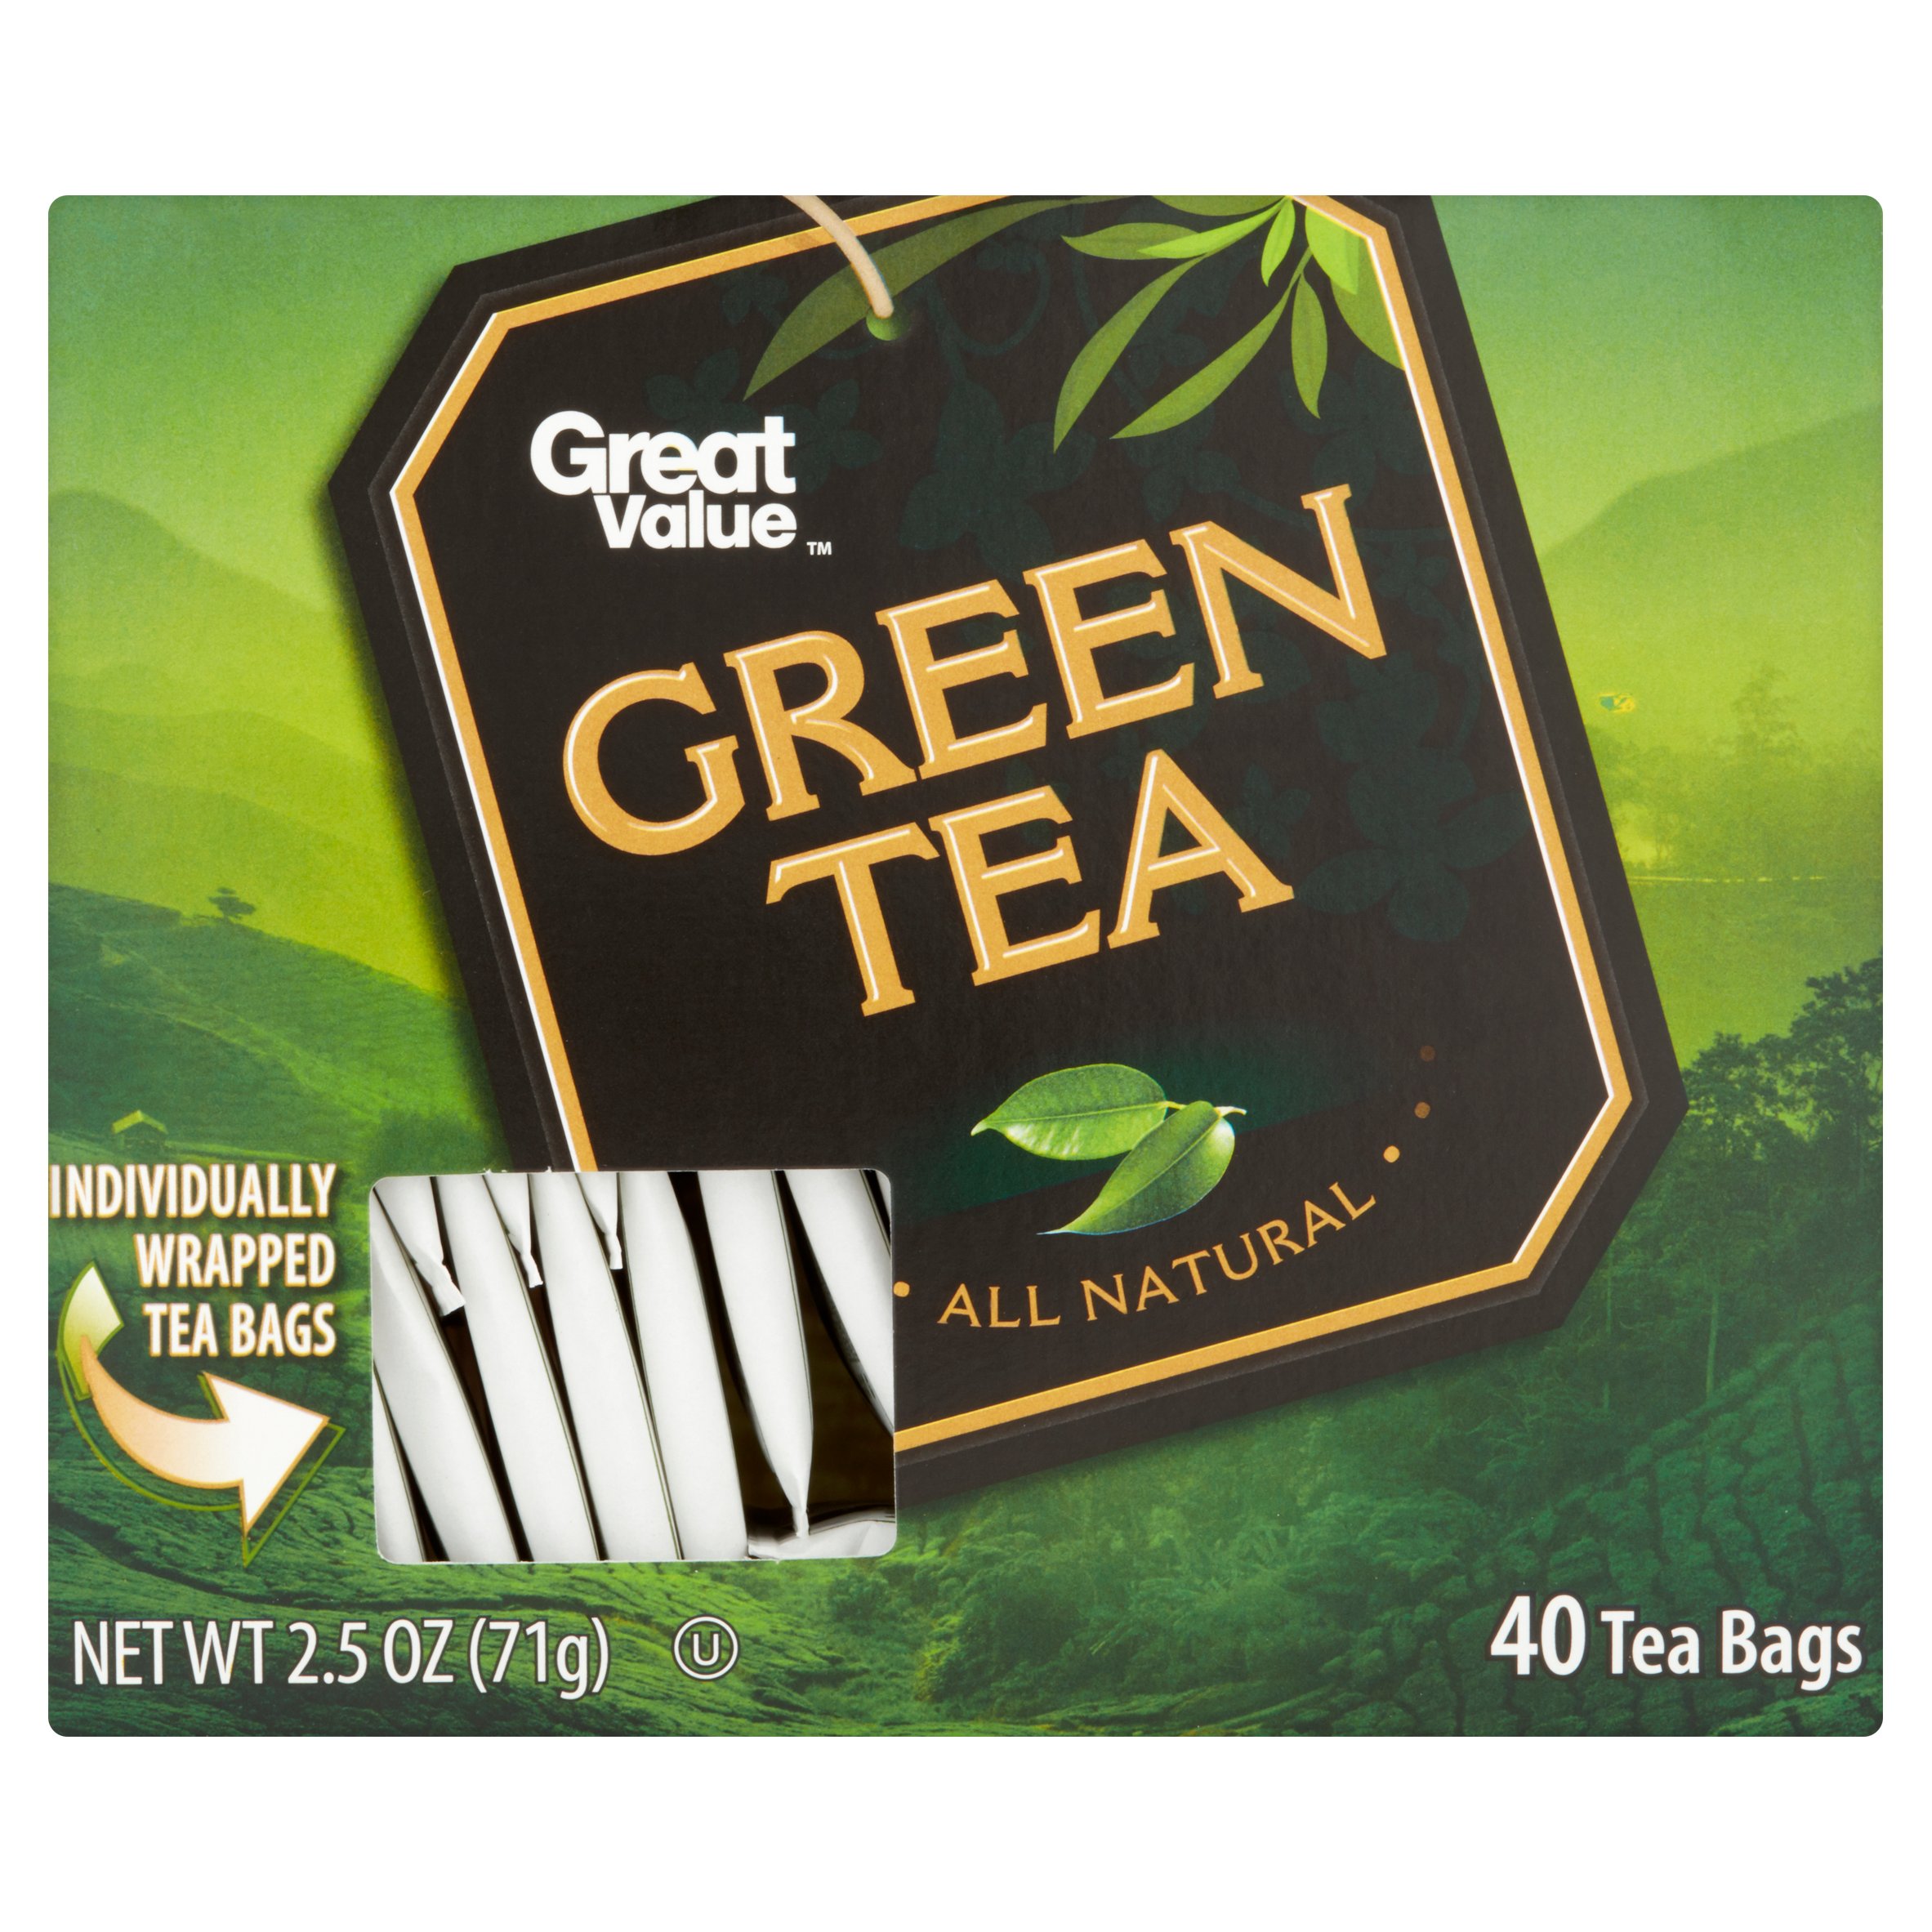 (4 Boxes) Great Value Green Tea, Tea Bags, 40 Count Image